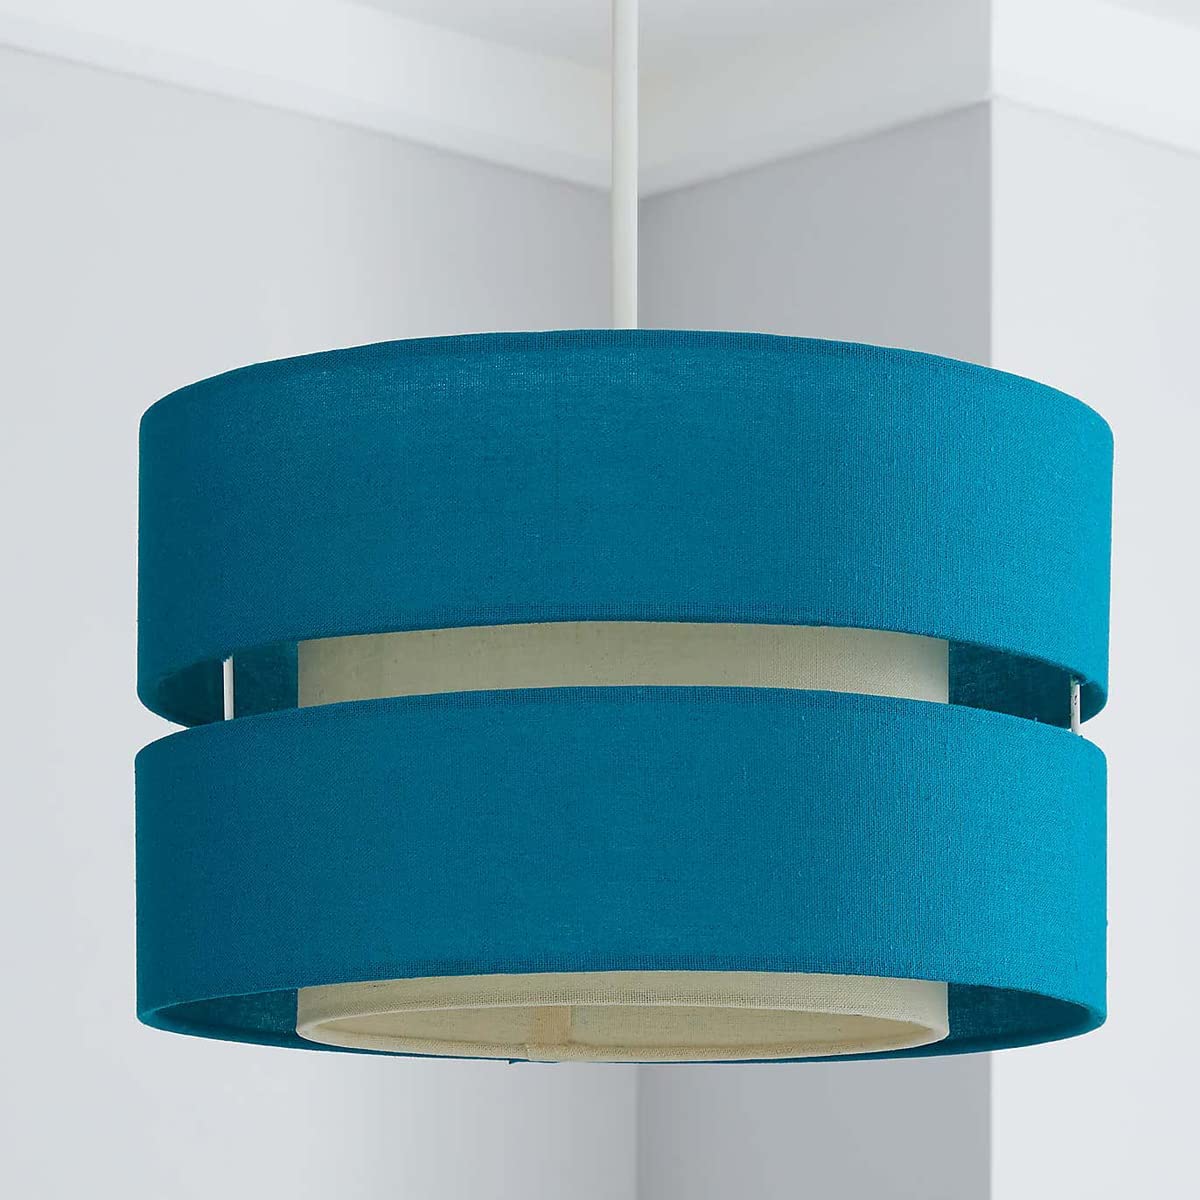 Our Gayle two tiered luxury fabric double layered shade is contemporary in its appearance and we have designed the shade to suit a range of interiors. Easy to fit simply attached to an existing pendant flitting.  It is crafted from high quality fabric material in two layers and complimented with a white inner which looks beautiful when light shines through. The shade has been made to fit both a ceiling light or lamp base.